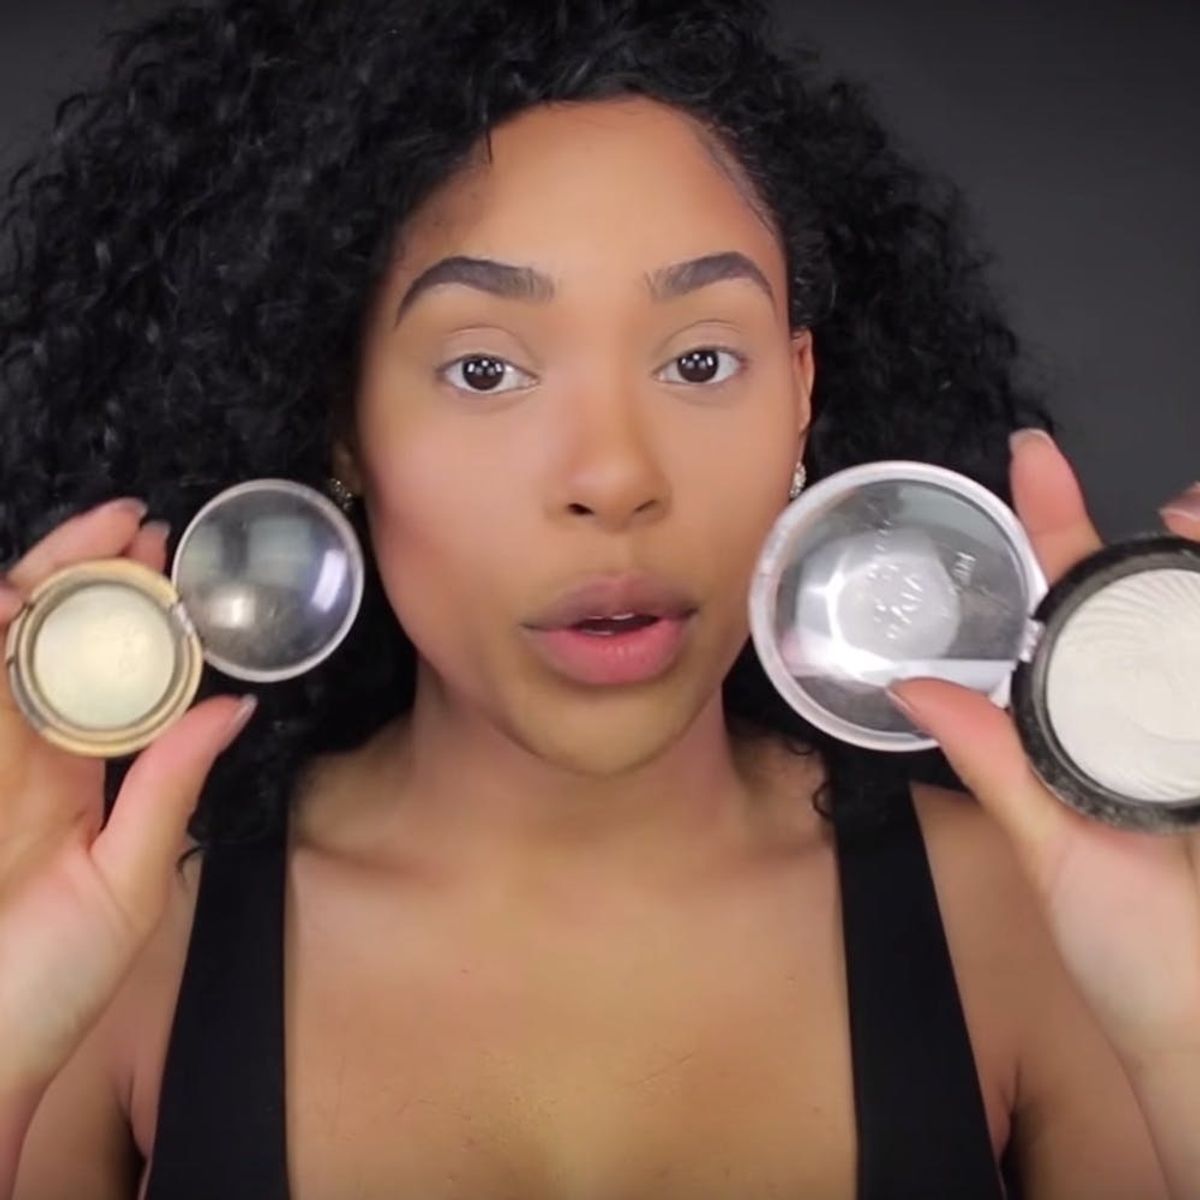 This Video Proves That Drugstore Makeup Is Just As Good As High-End Makeup